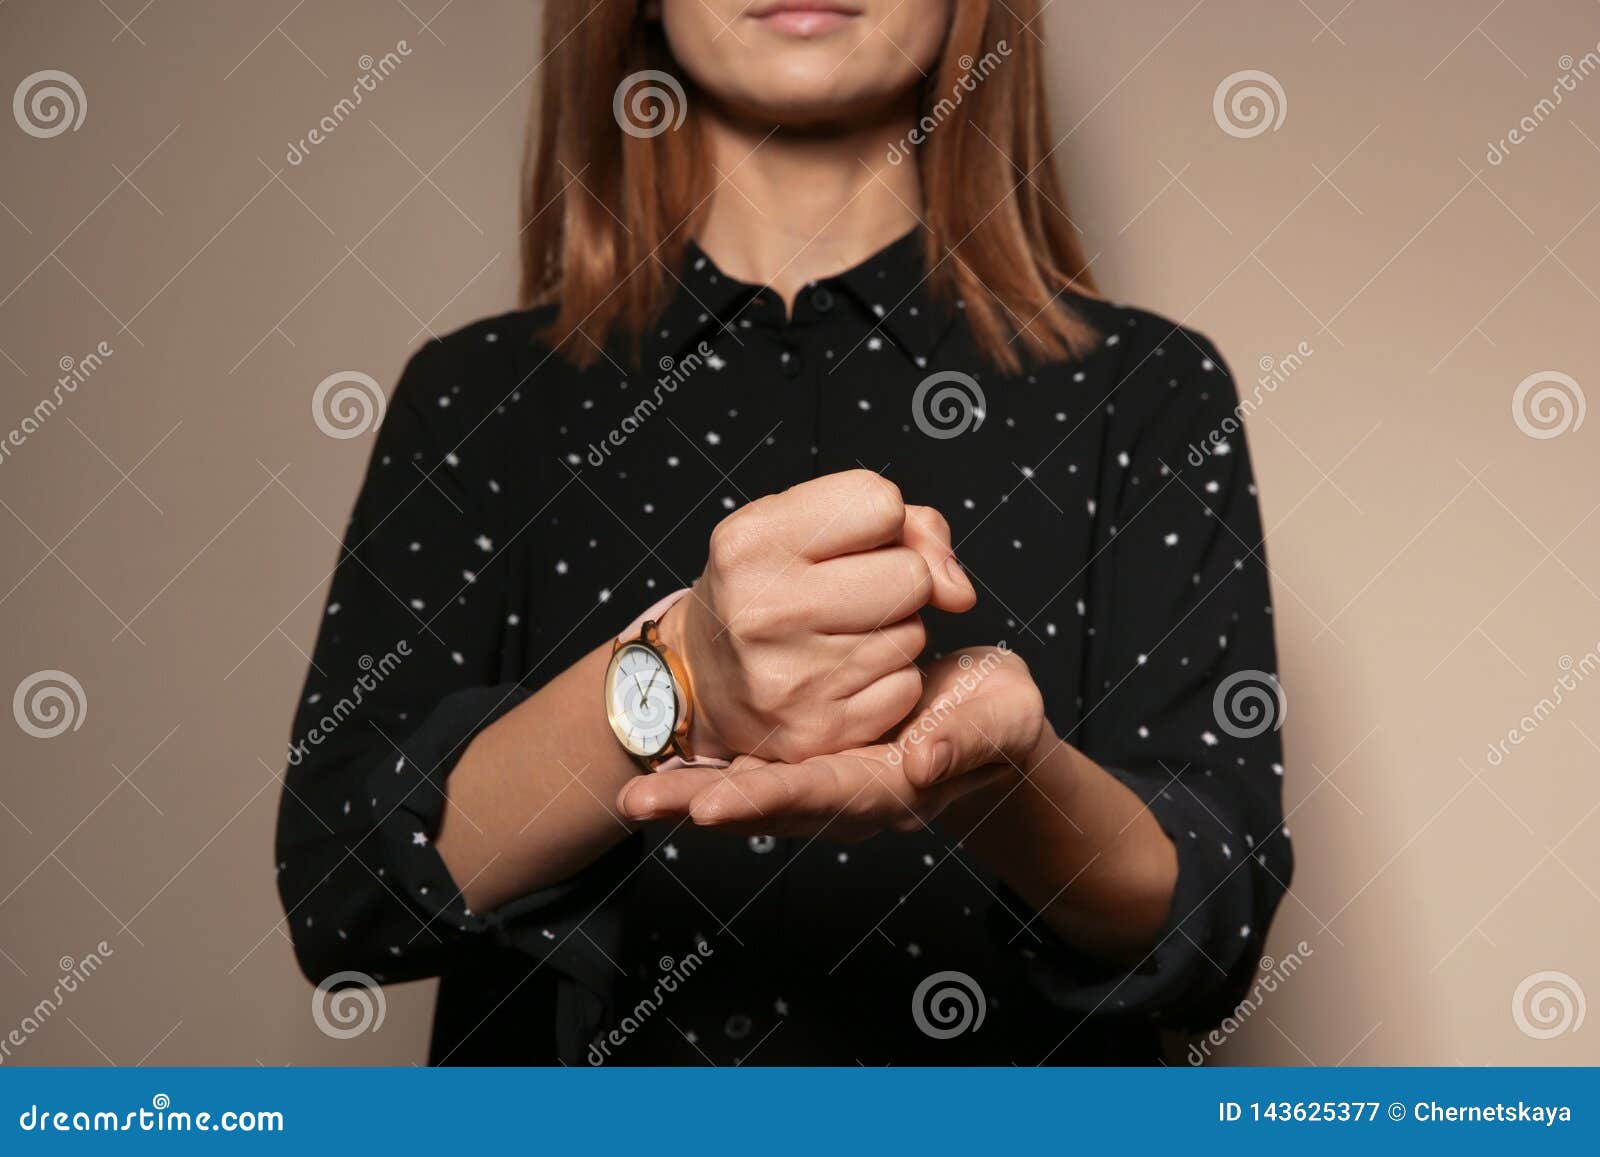 woman showing word crucify in sign language on color background